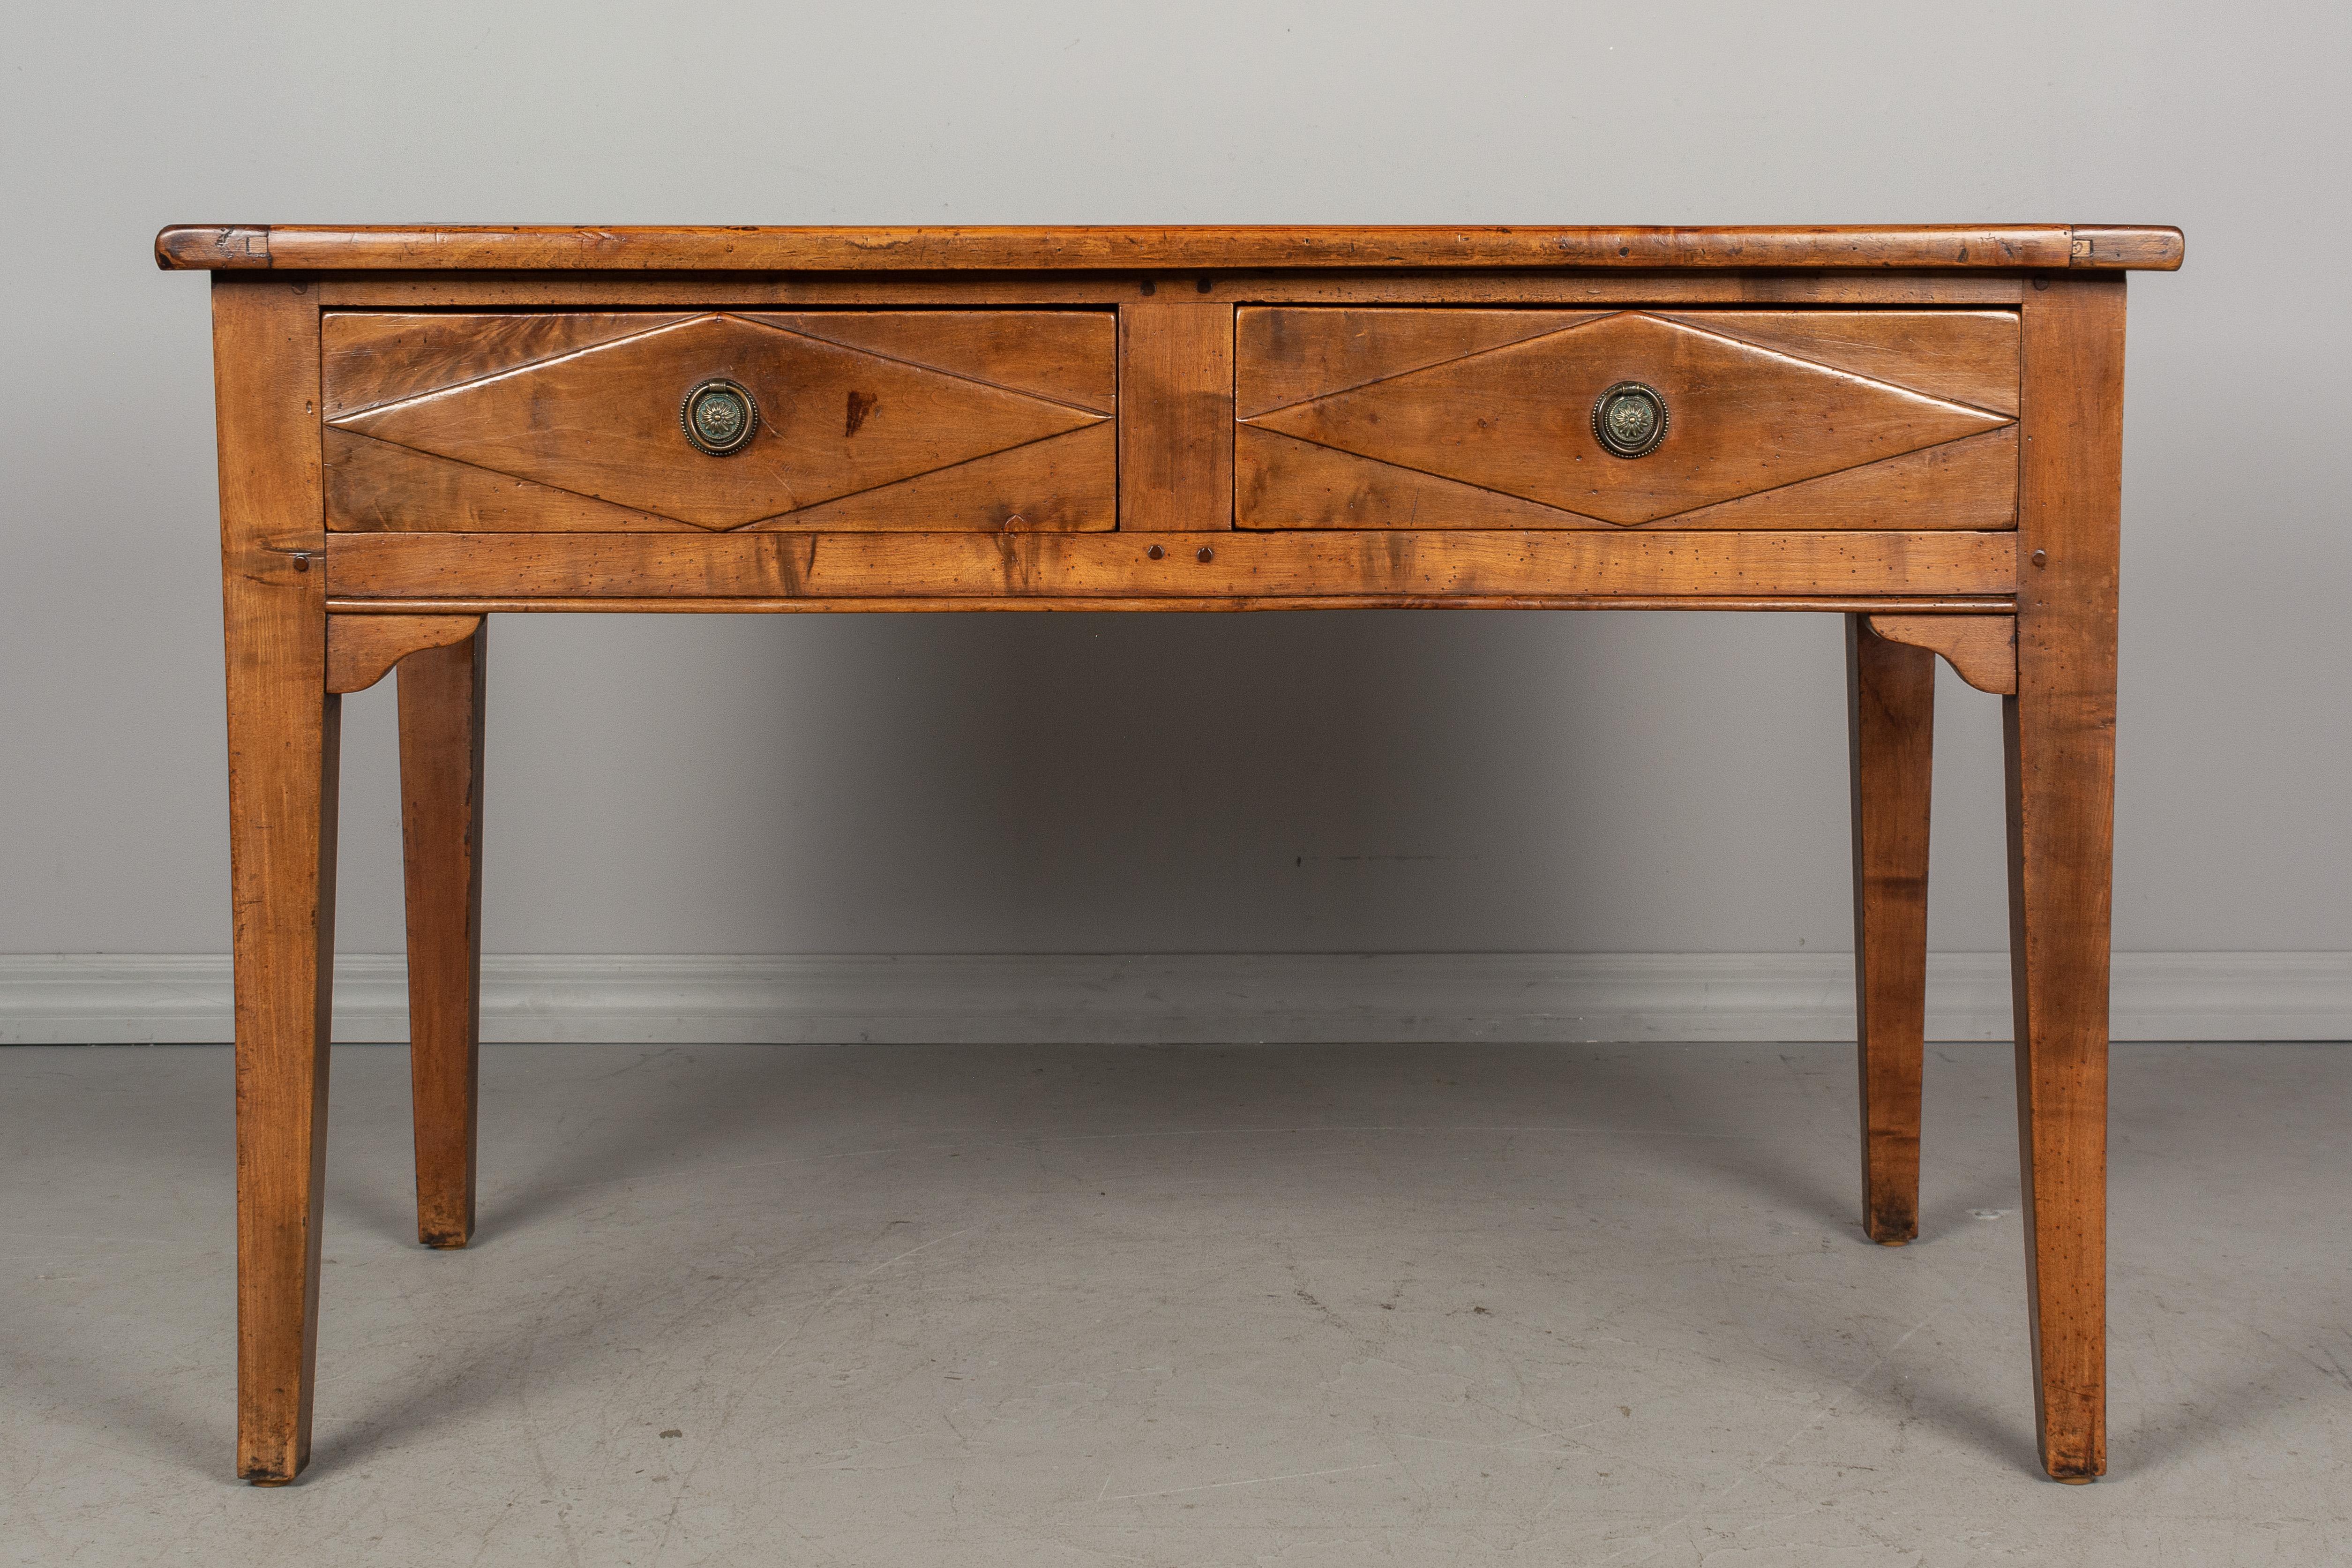 Hand-Crafted 19th Century Country French Walnut Farm Table